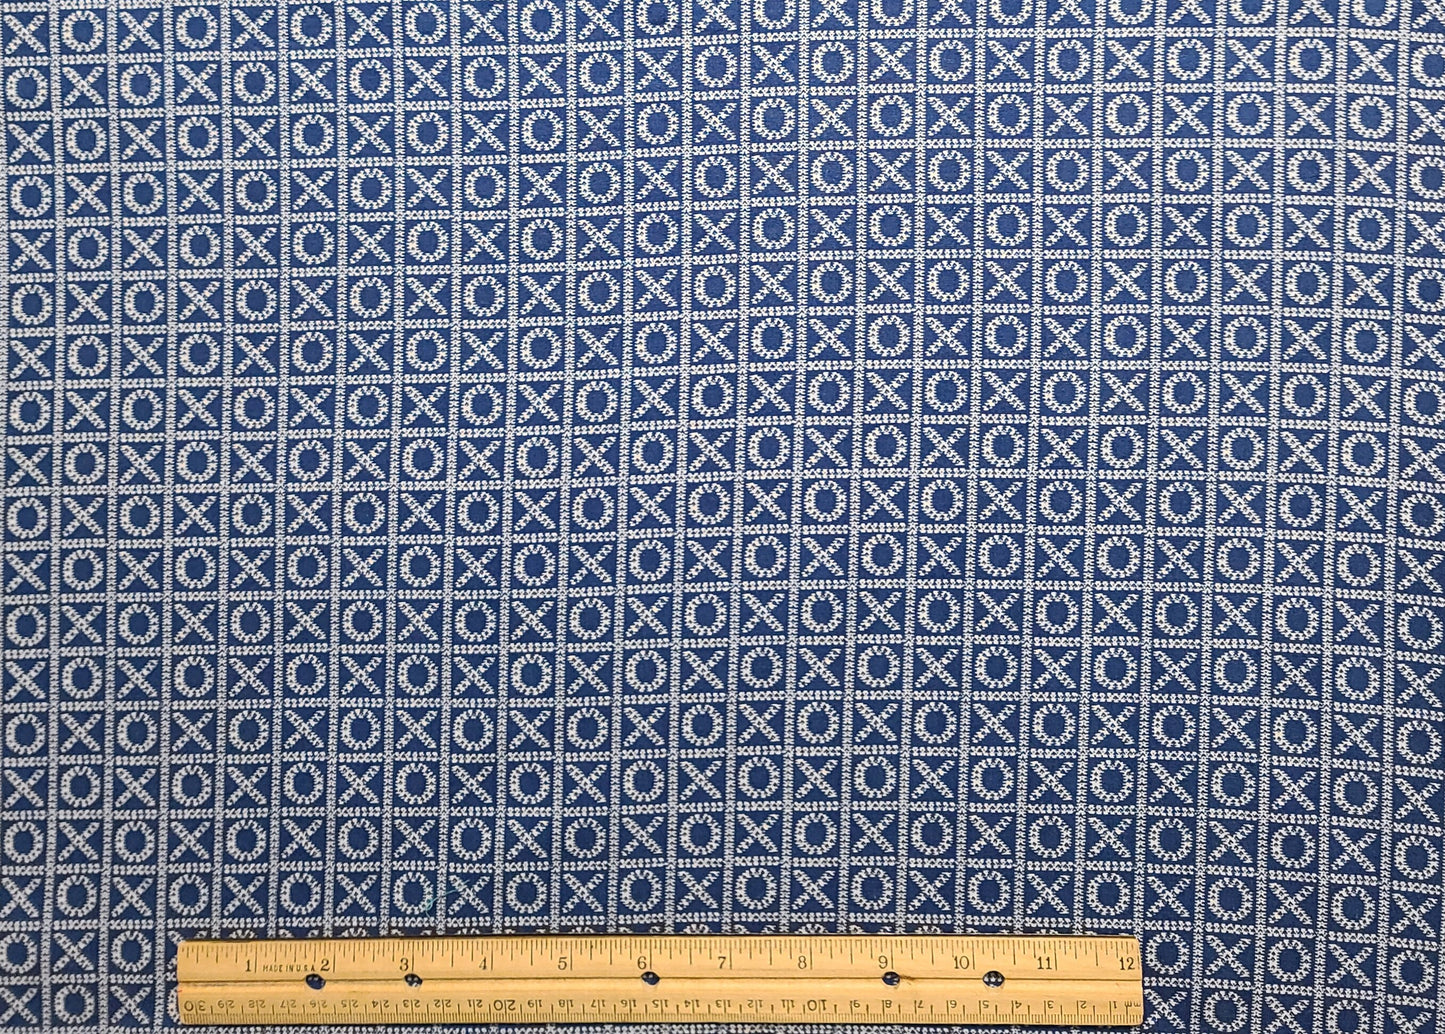 Blue and White "X" and "O" Block Print Fabric - Selvage to Selvage Print